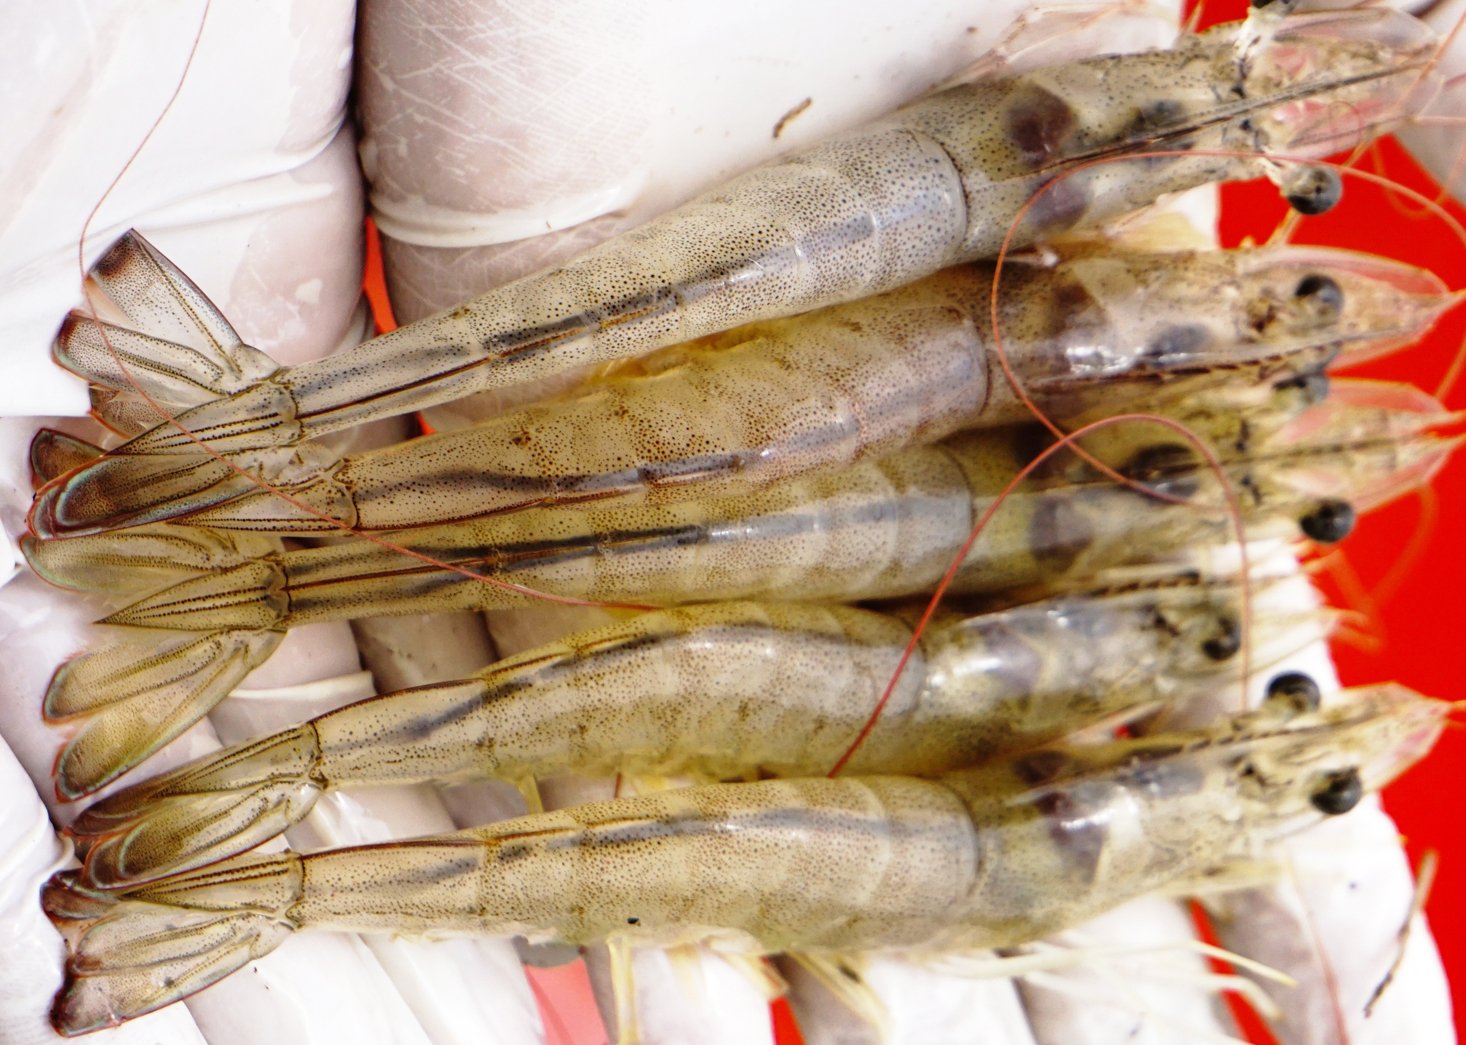 Farmed shrimp products in the Mekong Delta. Photo: Huu Duc.